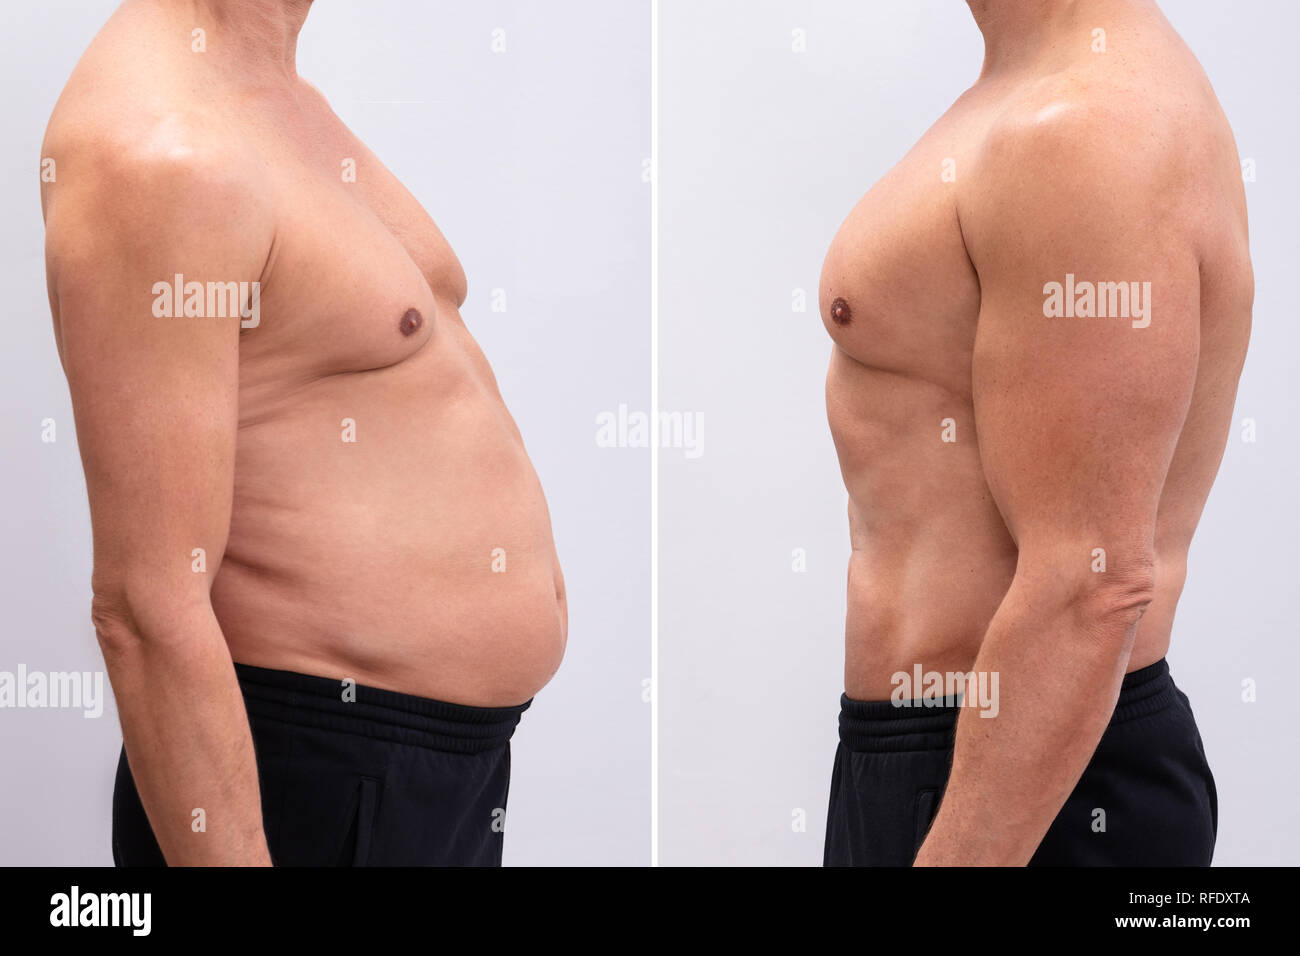 Side View Of A Mature Man Before And After Loosing Fat On White Background. Body shape was altered during retouching Stock Photo